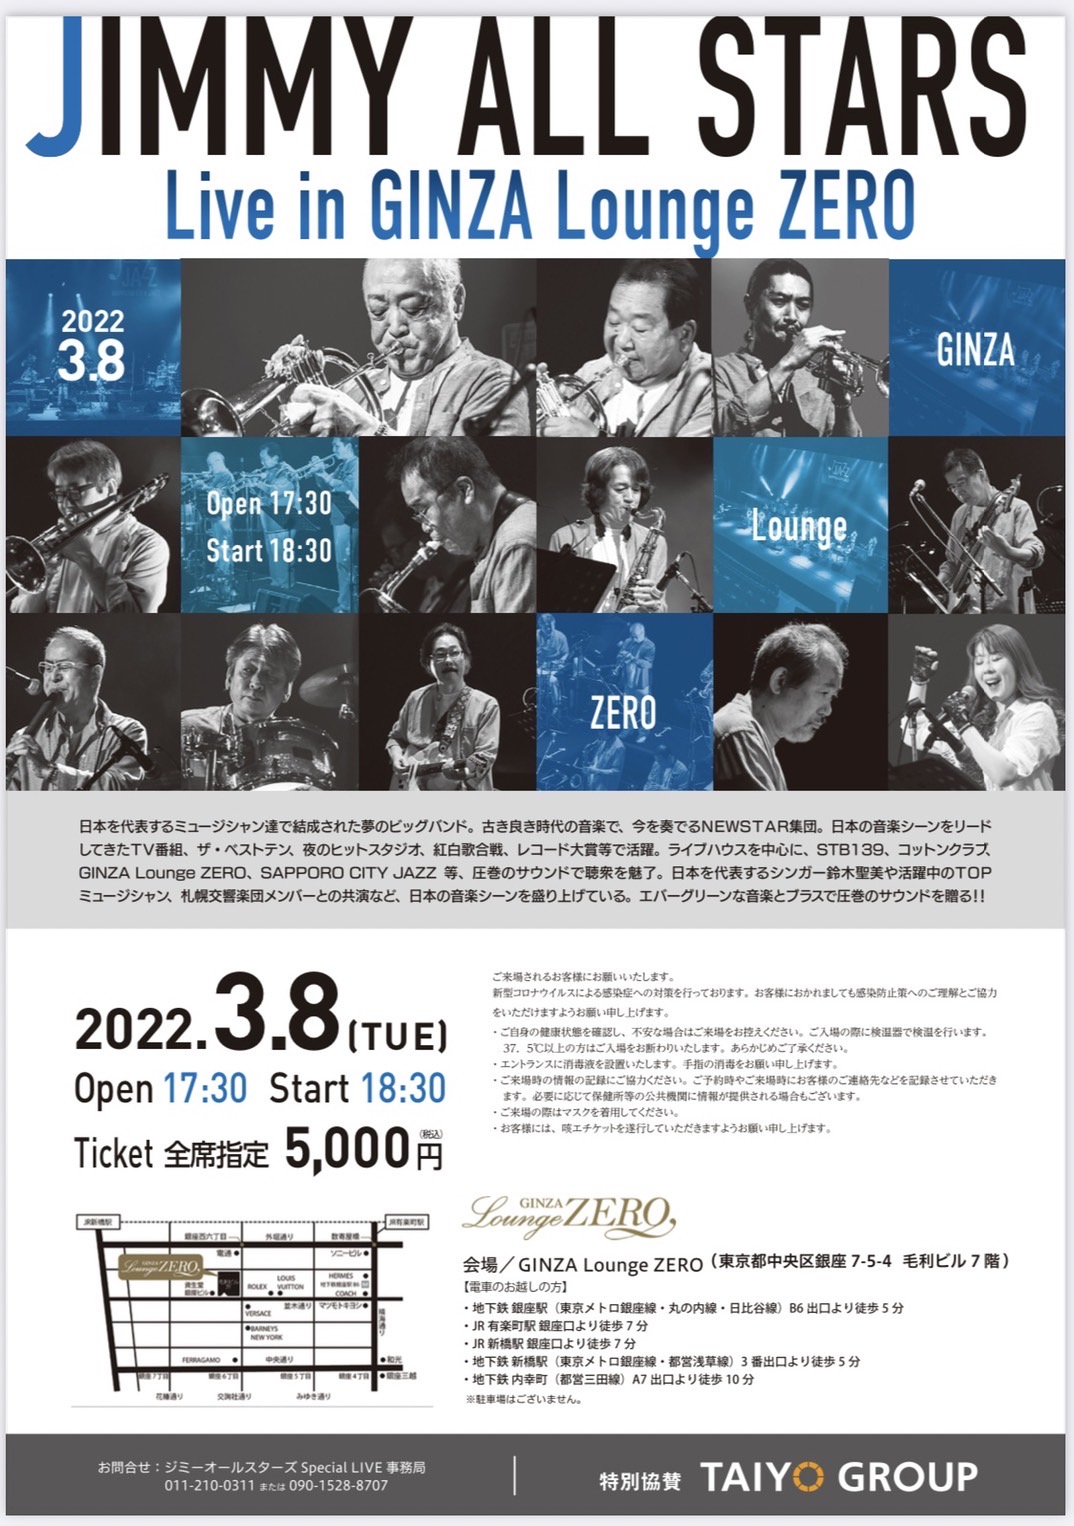 JIMMY all stars live in ginza lounge zero